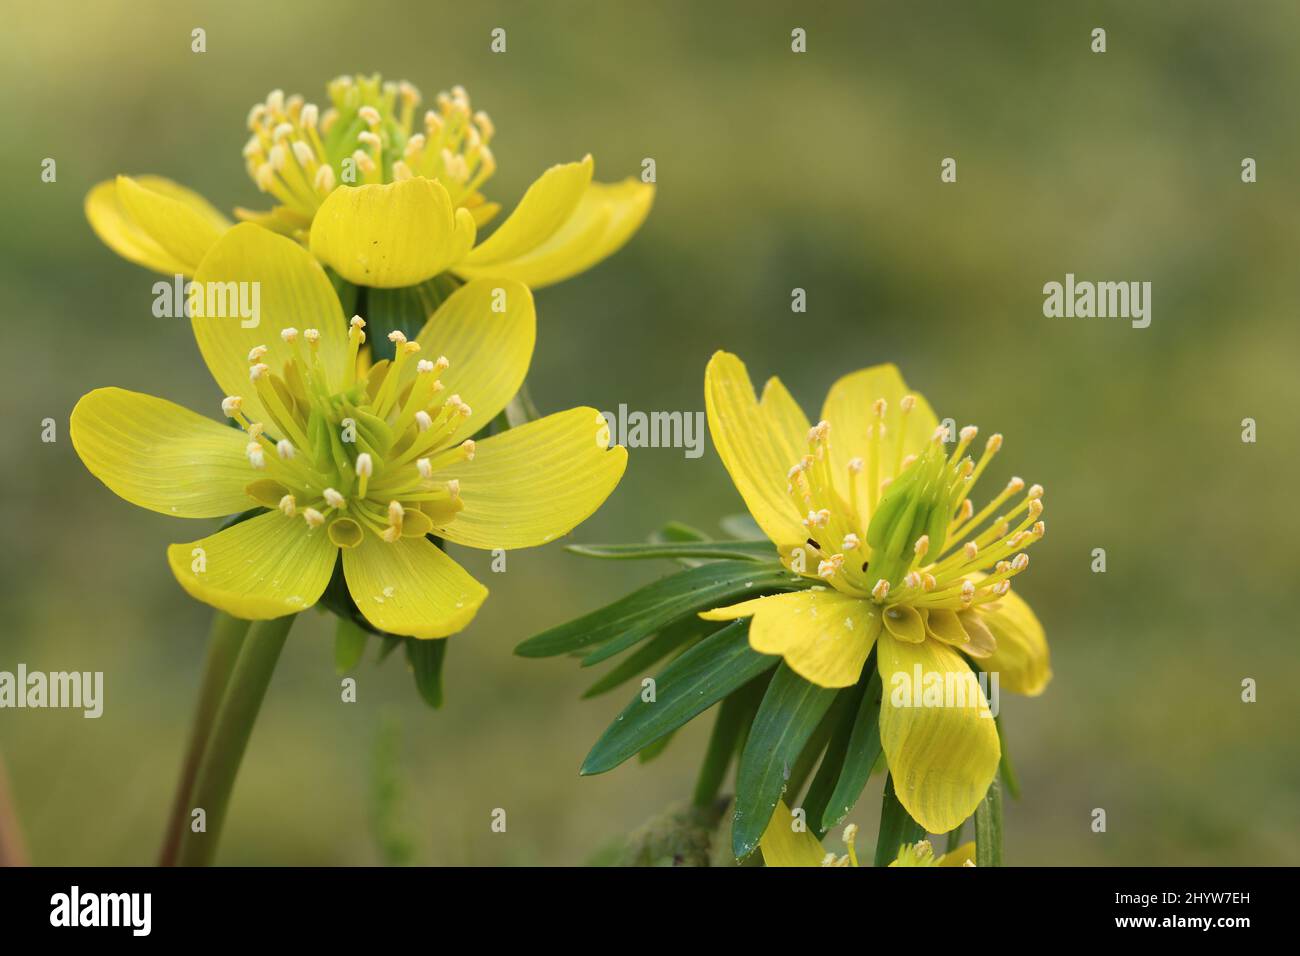 close-up of three yellow eranthis hyemalis flowers against a blurred natural background Stock Photo